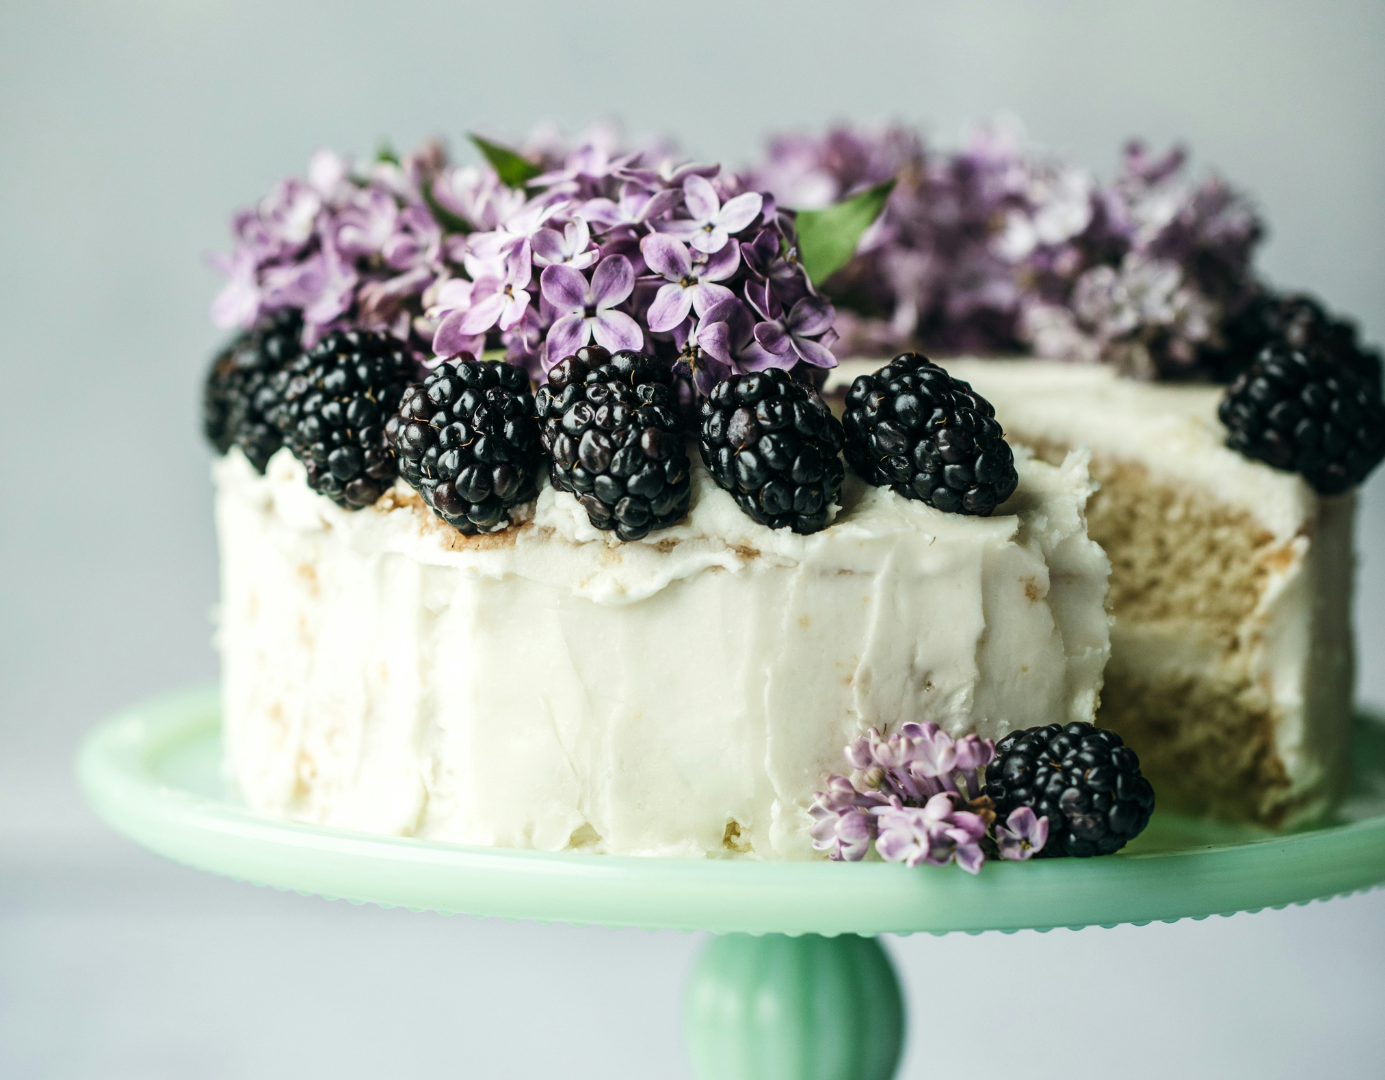 Sponge cake decorated with blackberries and purple flowers